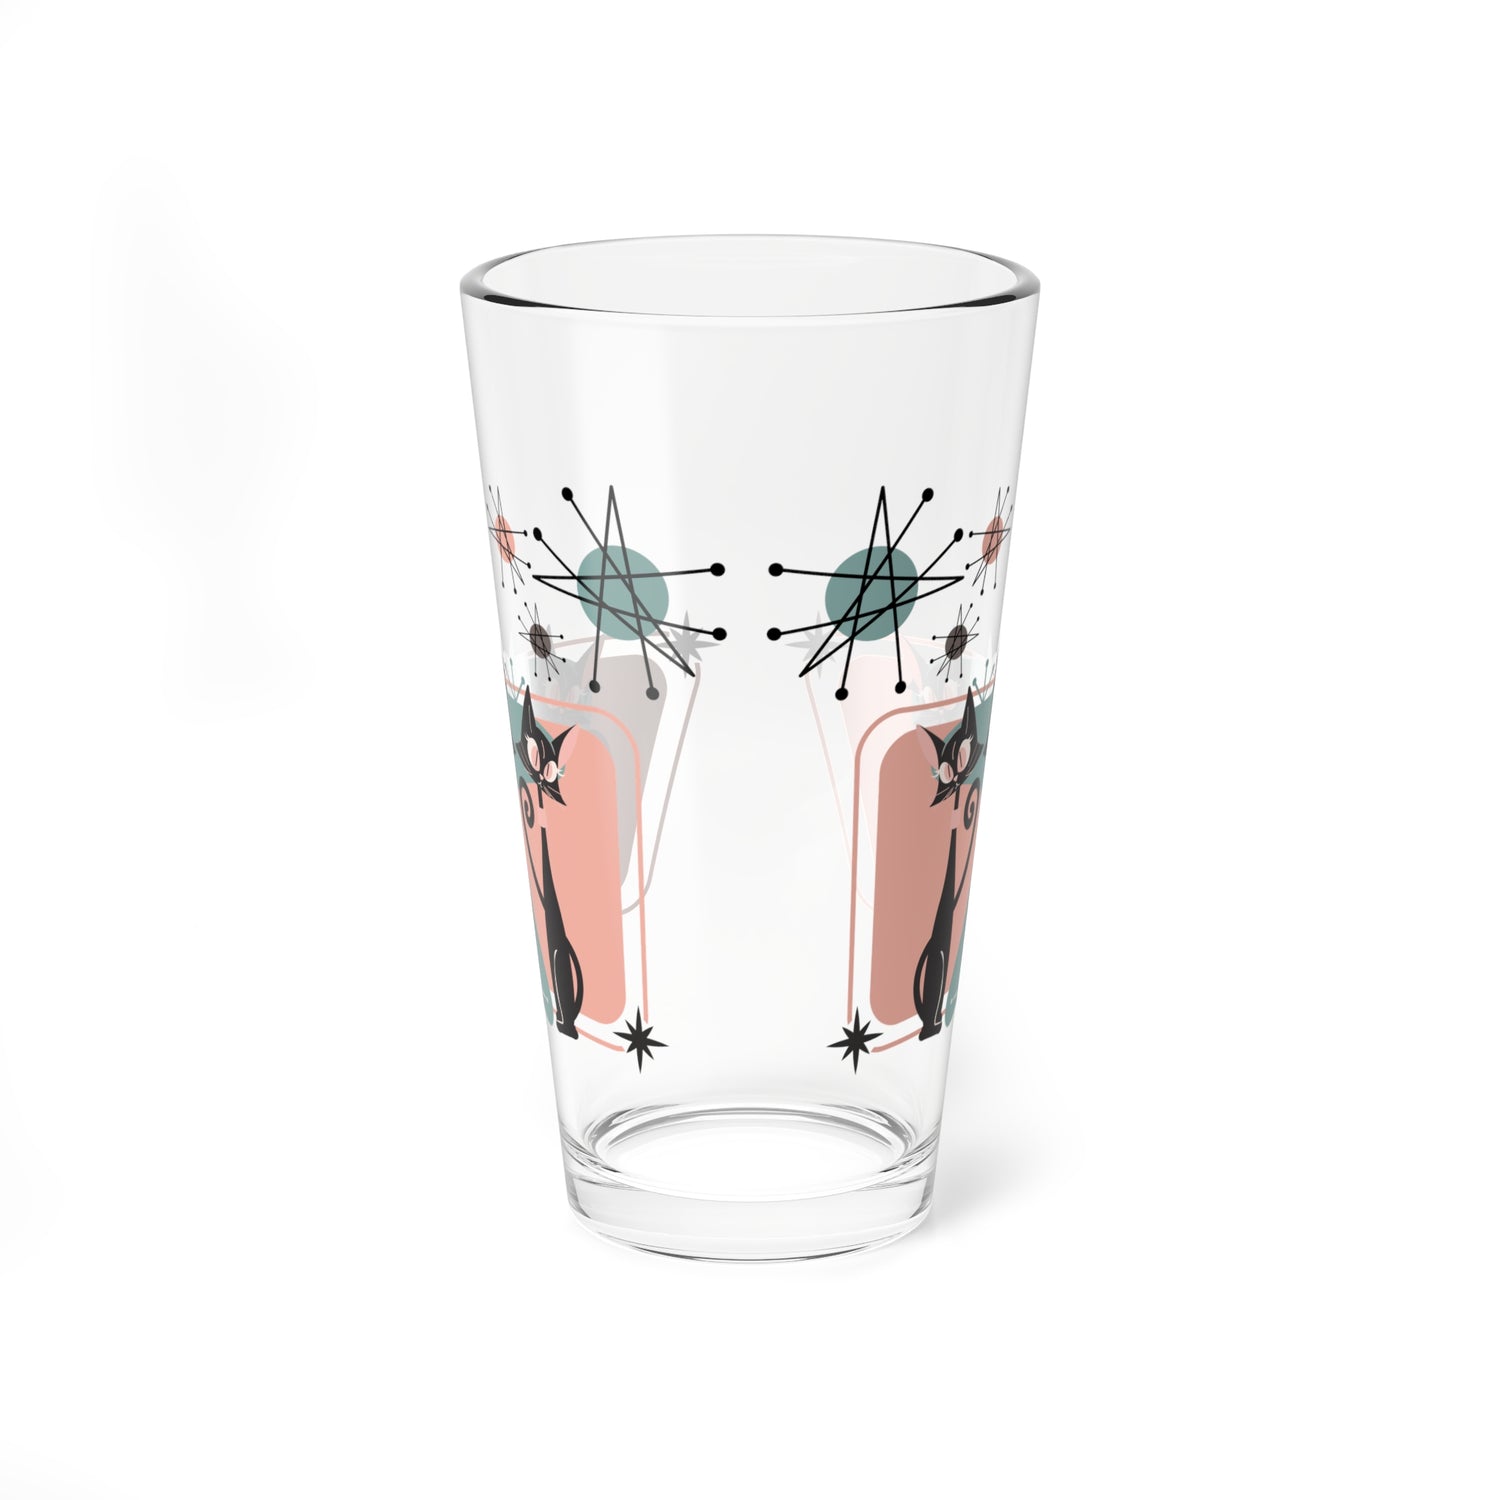 50s Style, Crazy Cat Mom, Atomic Cats, Kitschy Mid Century Modern Cocktail, Mocktail Glass